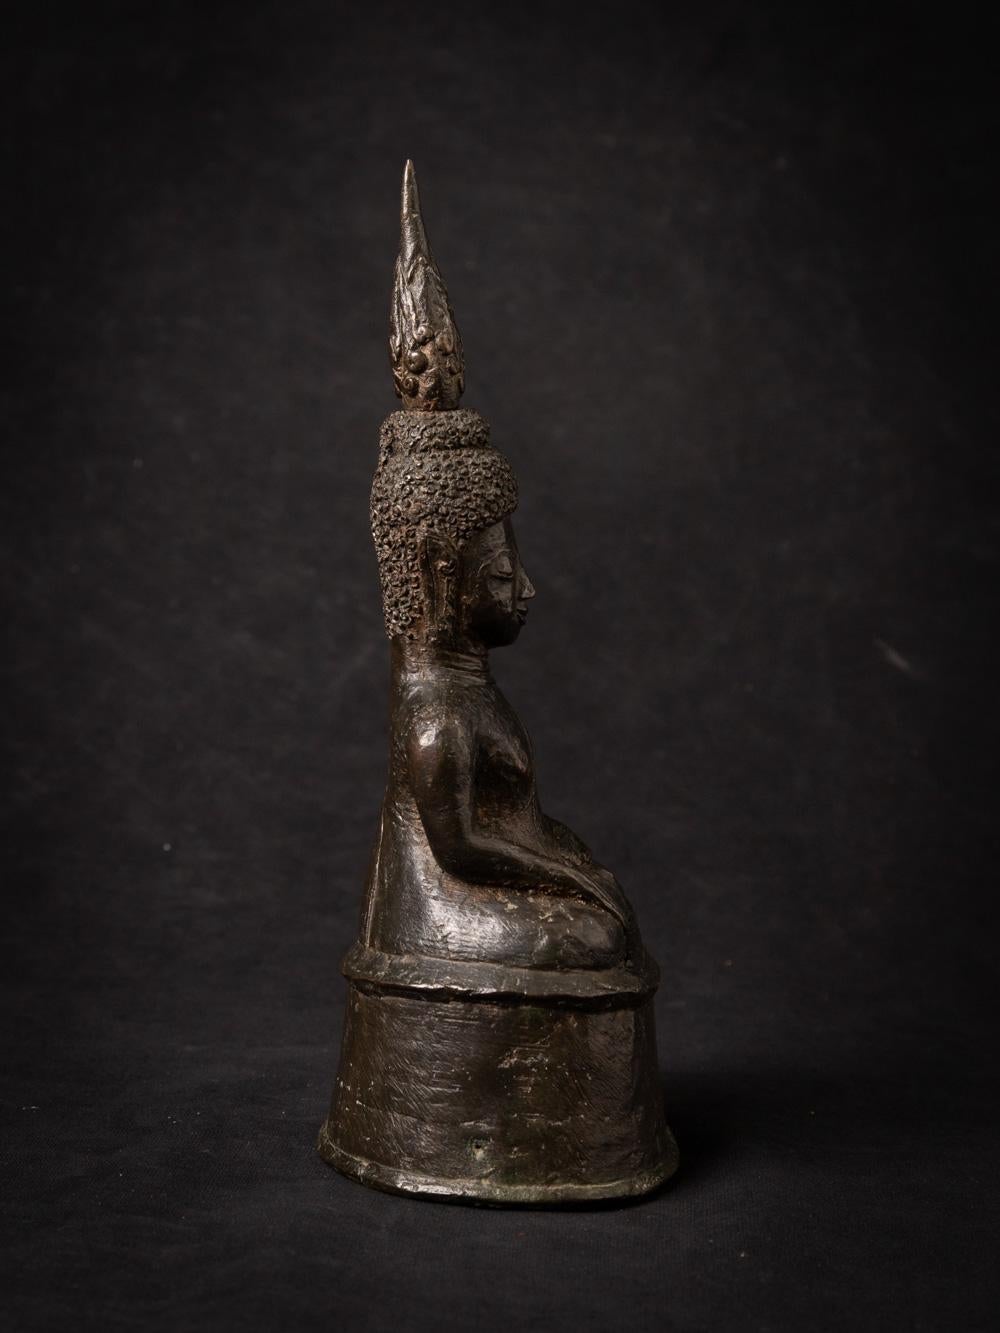 18th Century and Earlier 16-17th century antique bronze Buddha statue from Laos in Bhumisparsha Mudra